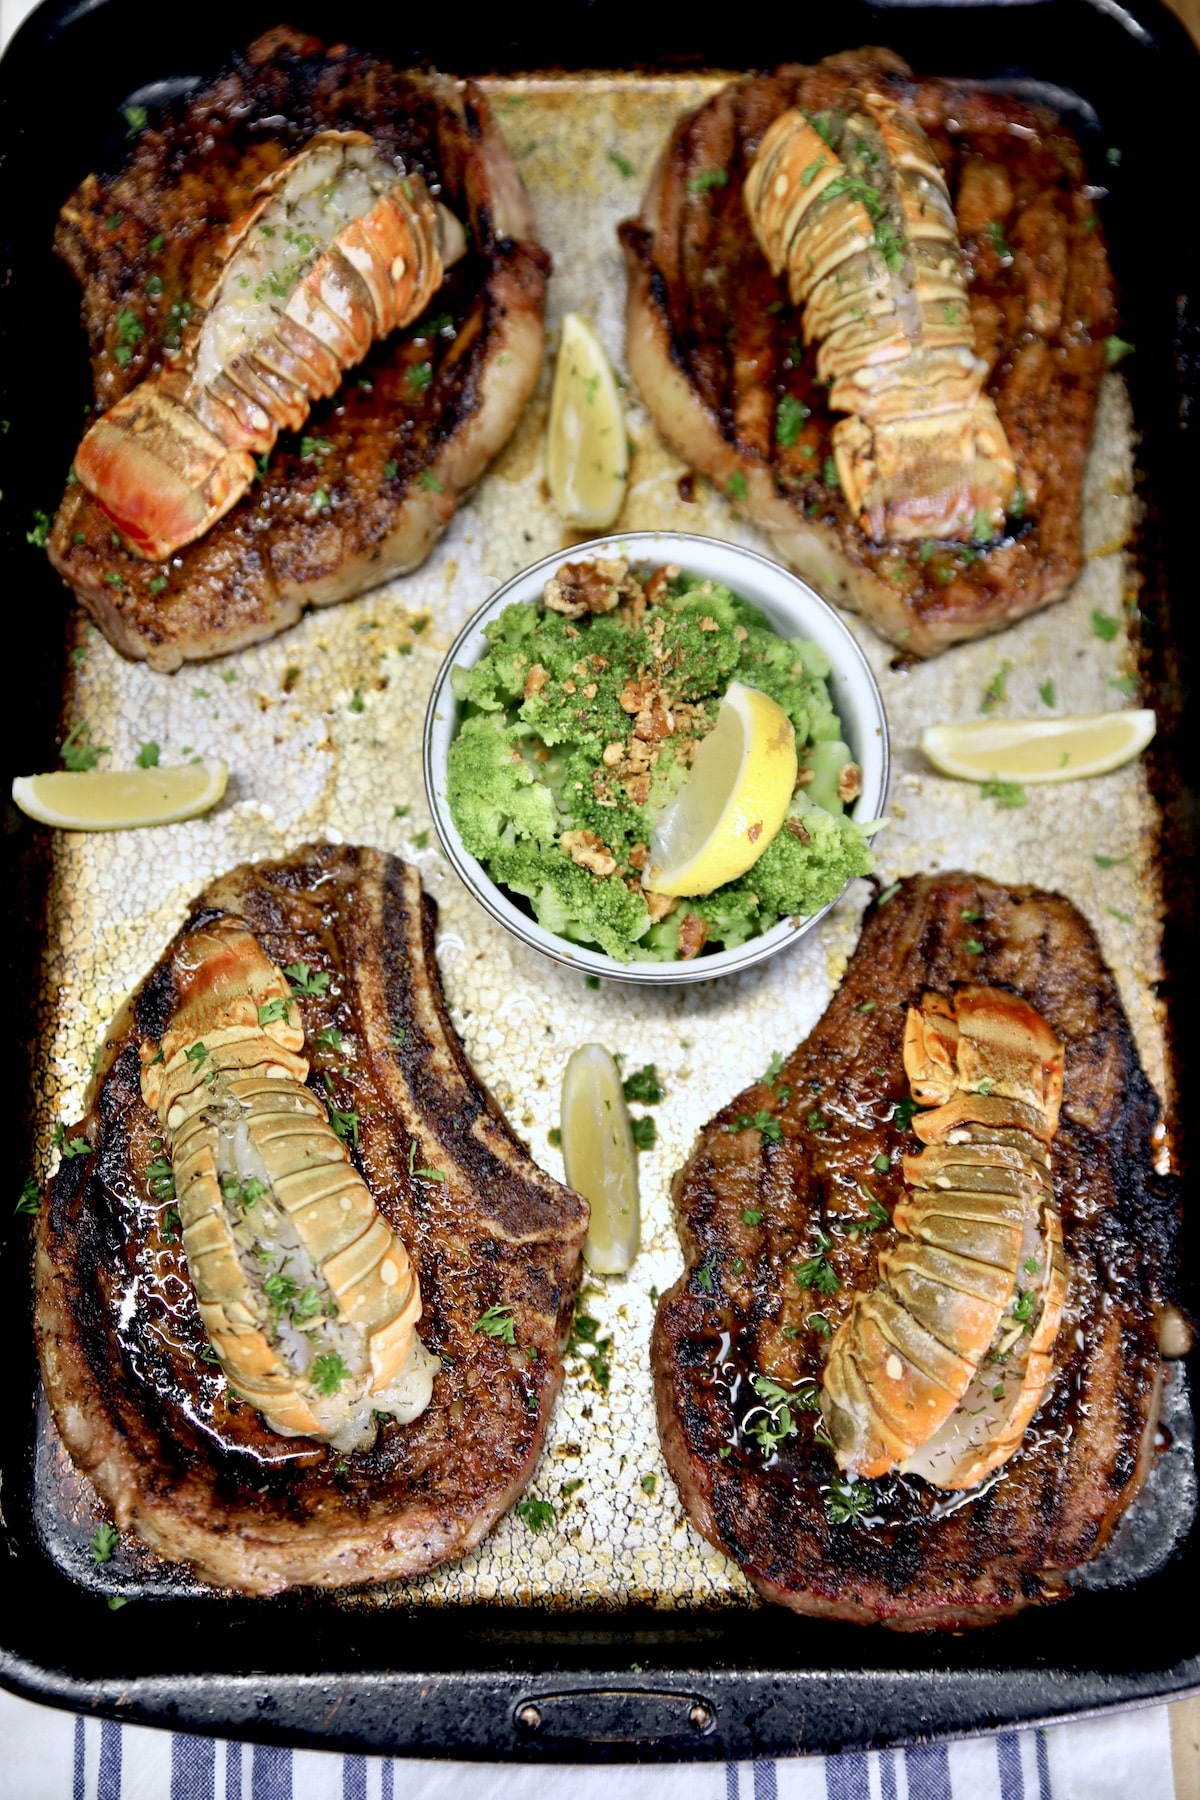 Pan of 4 steaks with lobster tails. Bowl of broccoli, lemon slices.